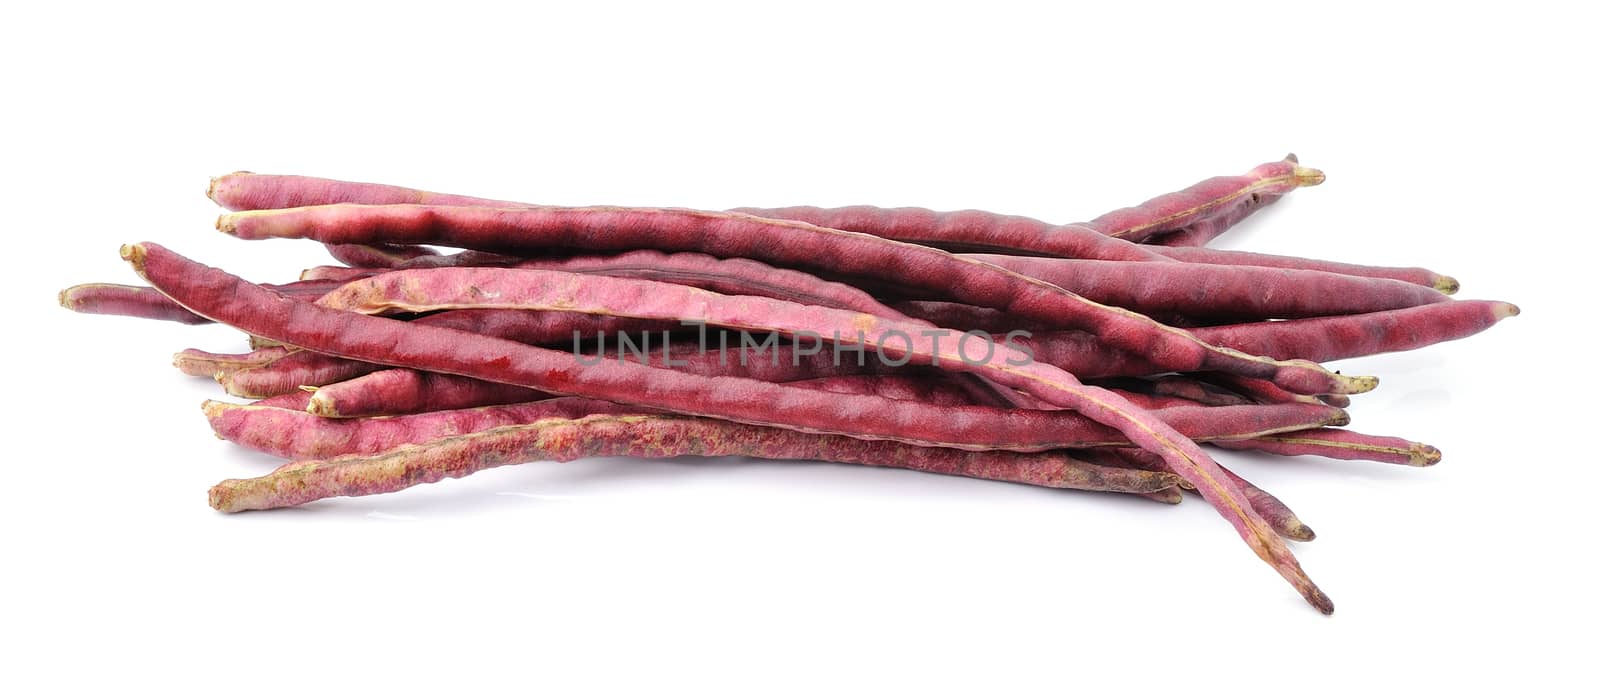 red beans on the white background.